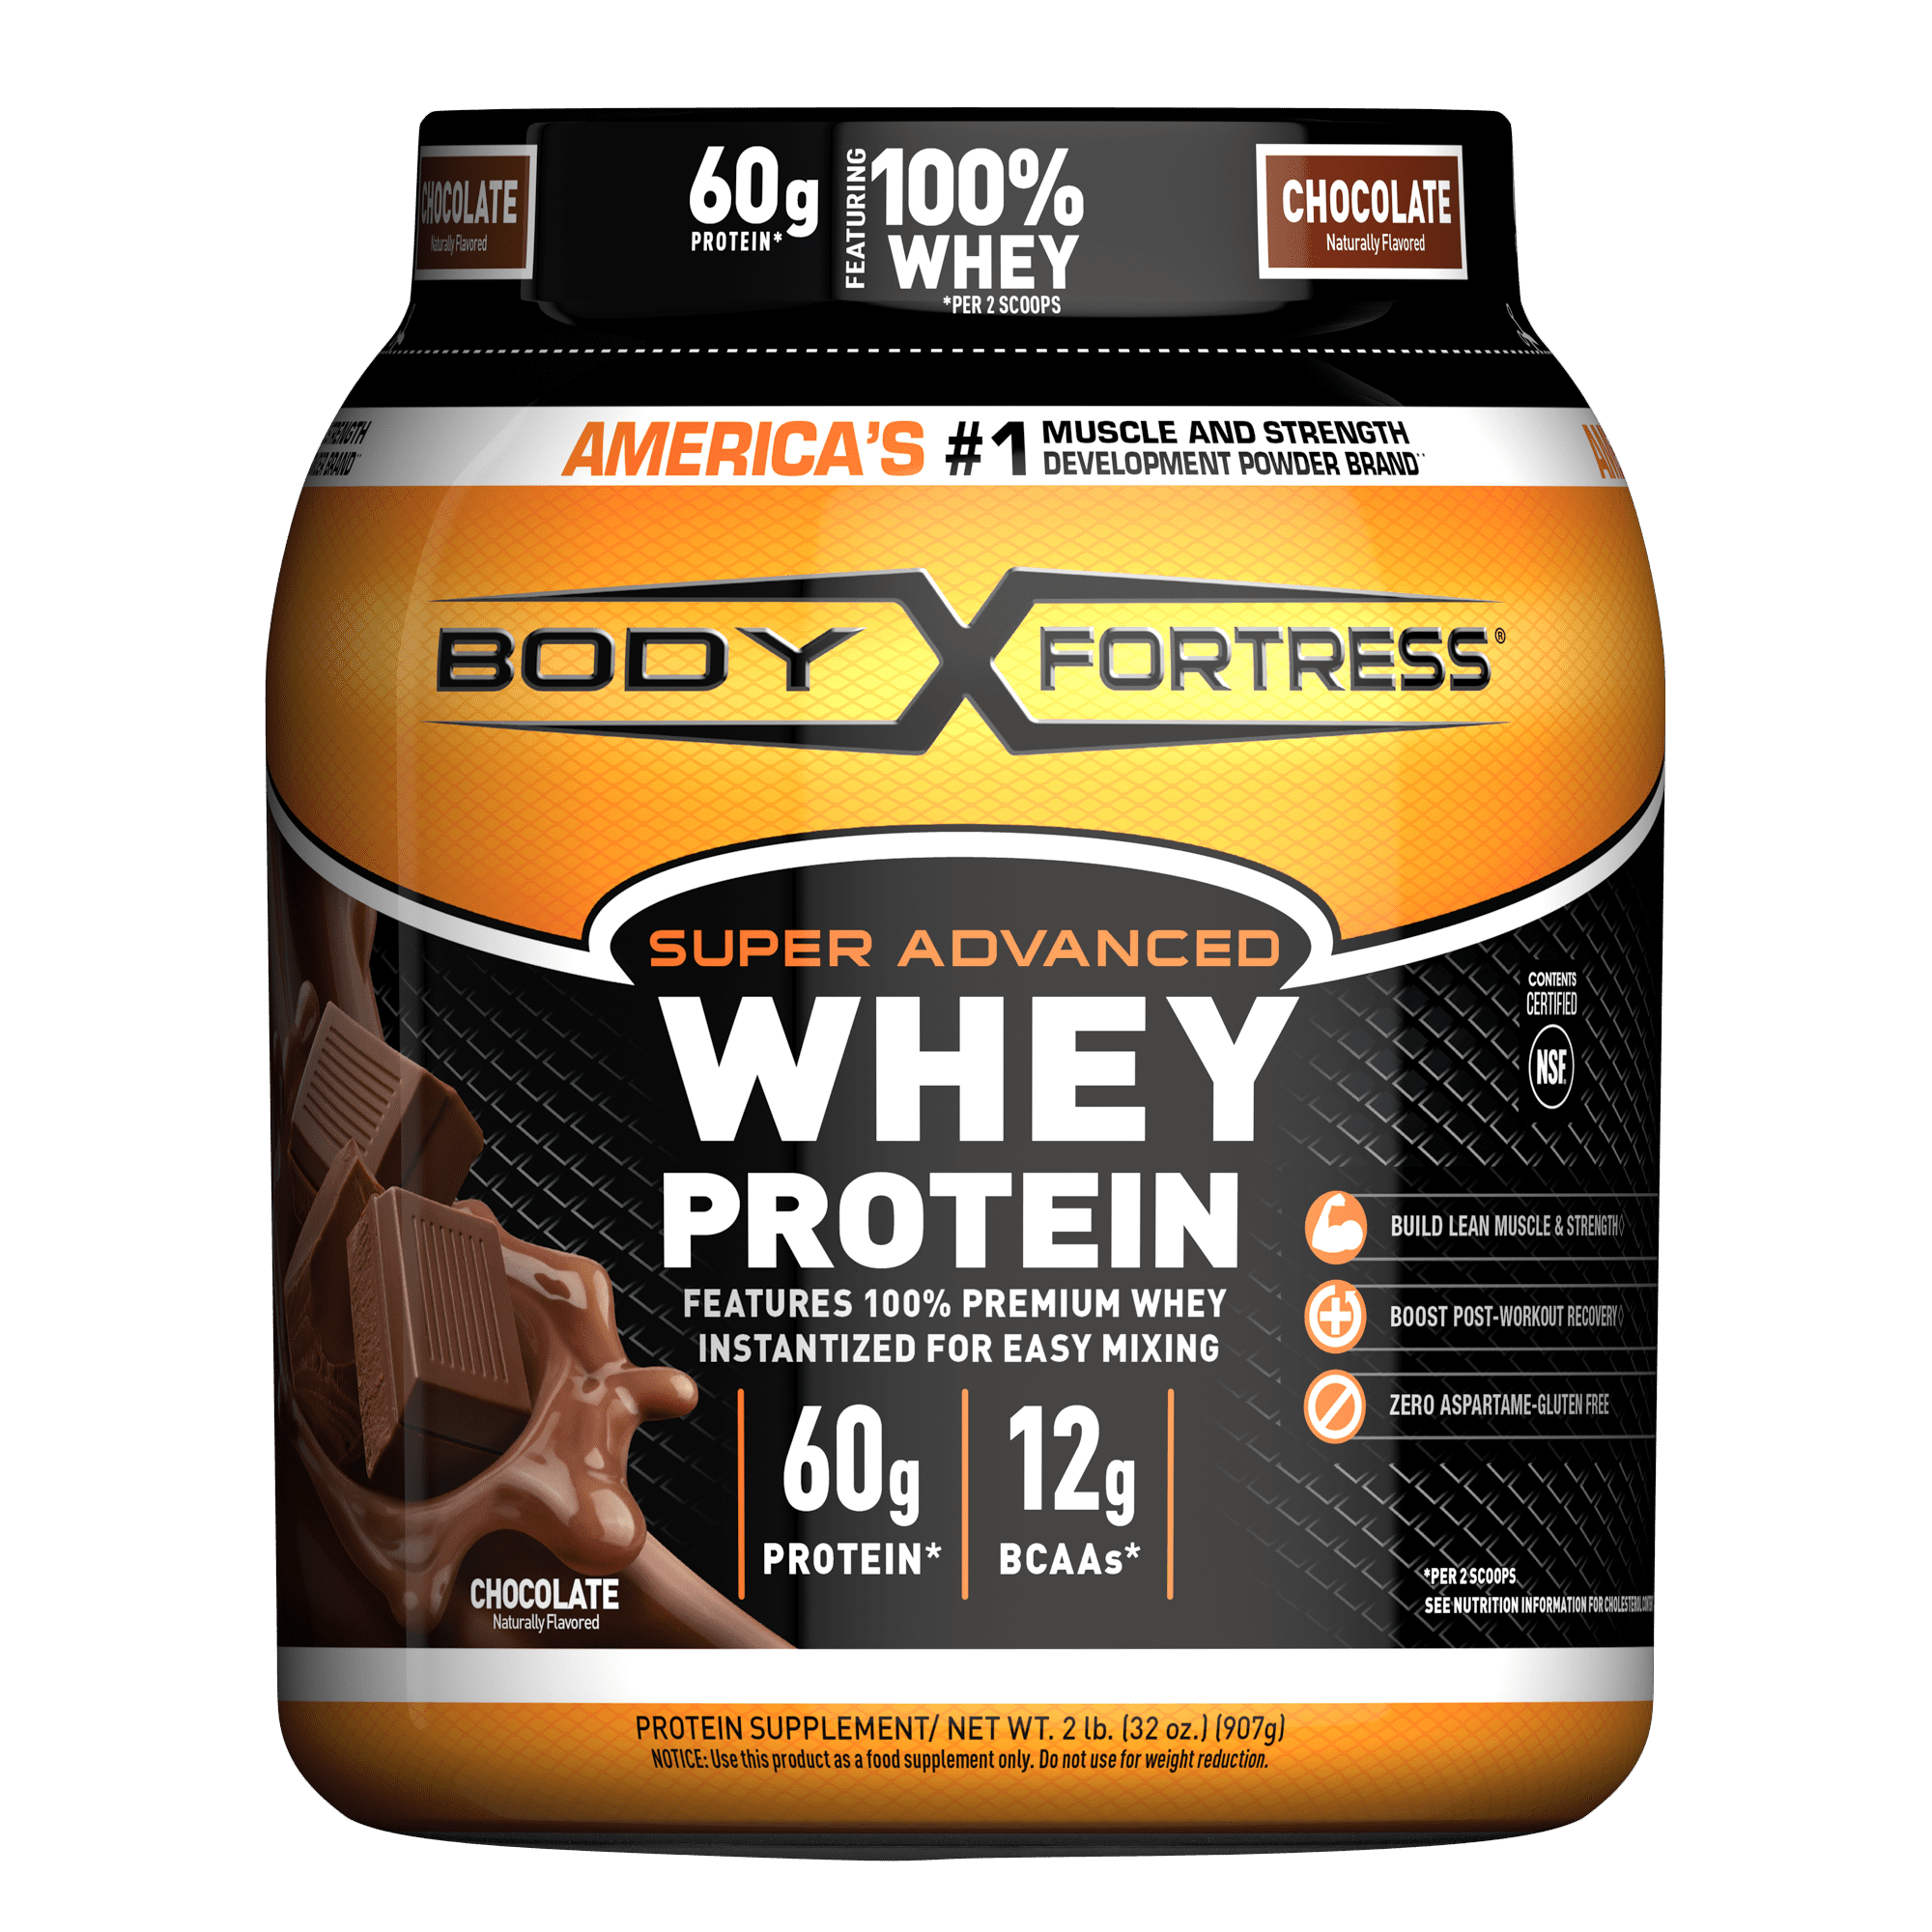 Body Fortress Super Advanced Whey Protein Powder, Chocolate Flavored